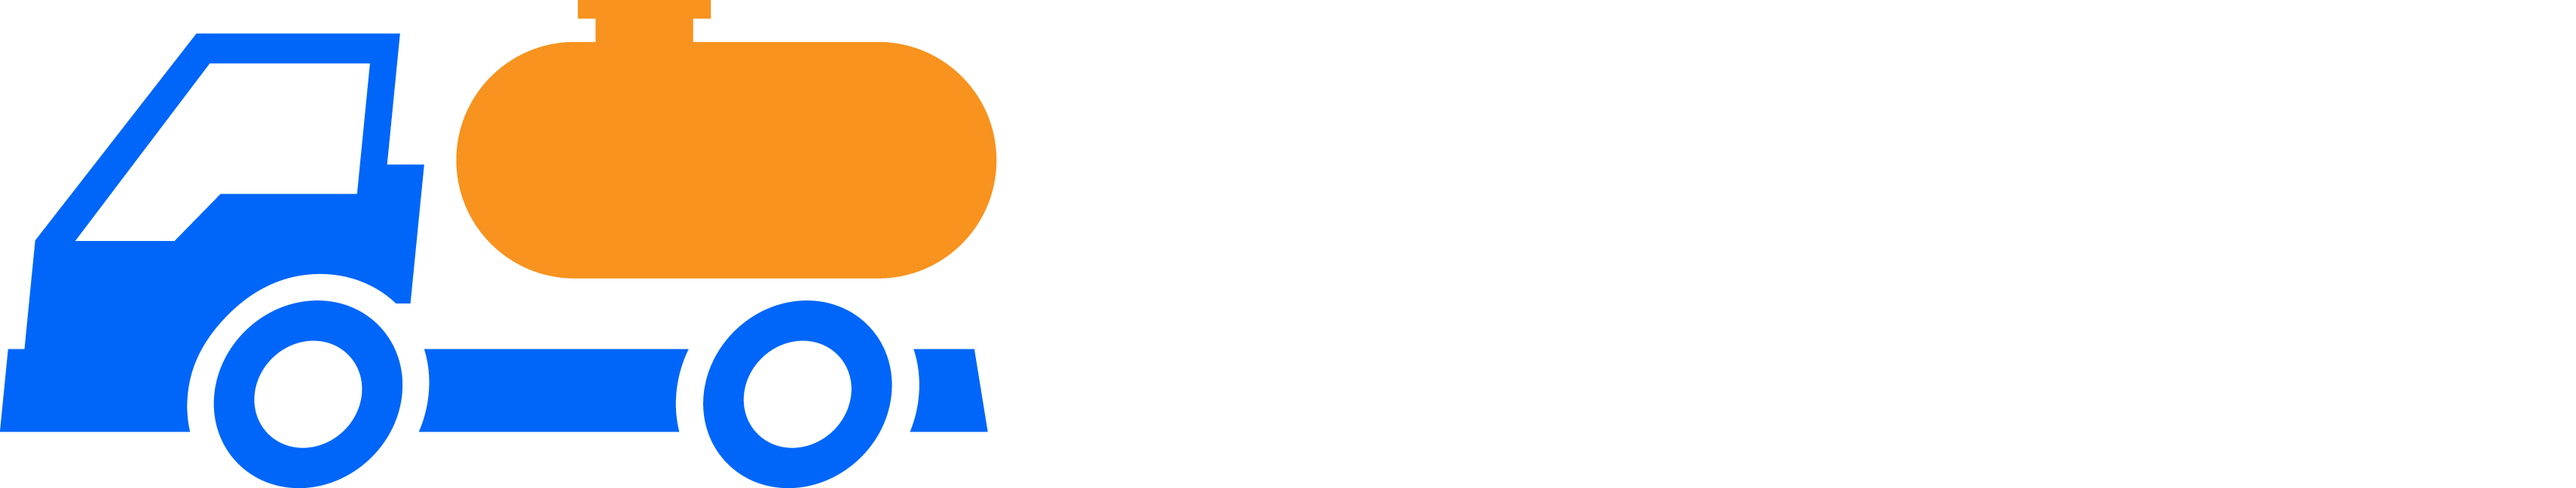 Live Safe Oil Tank Removal and Abandonment